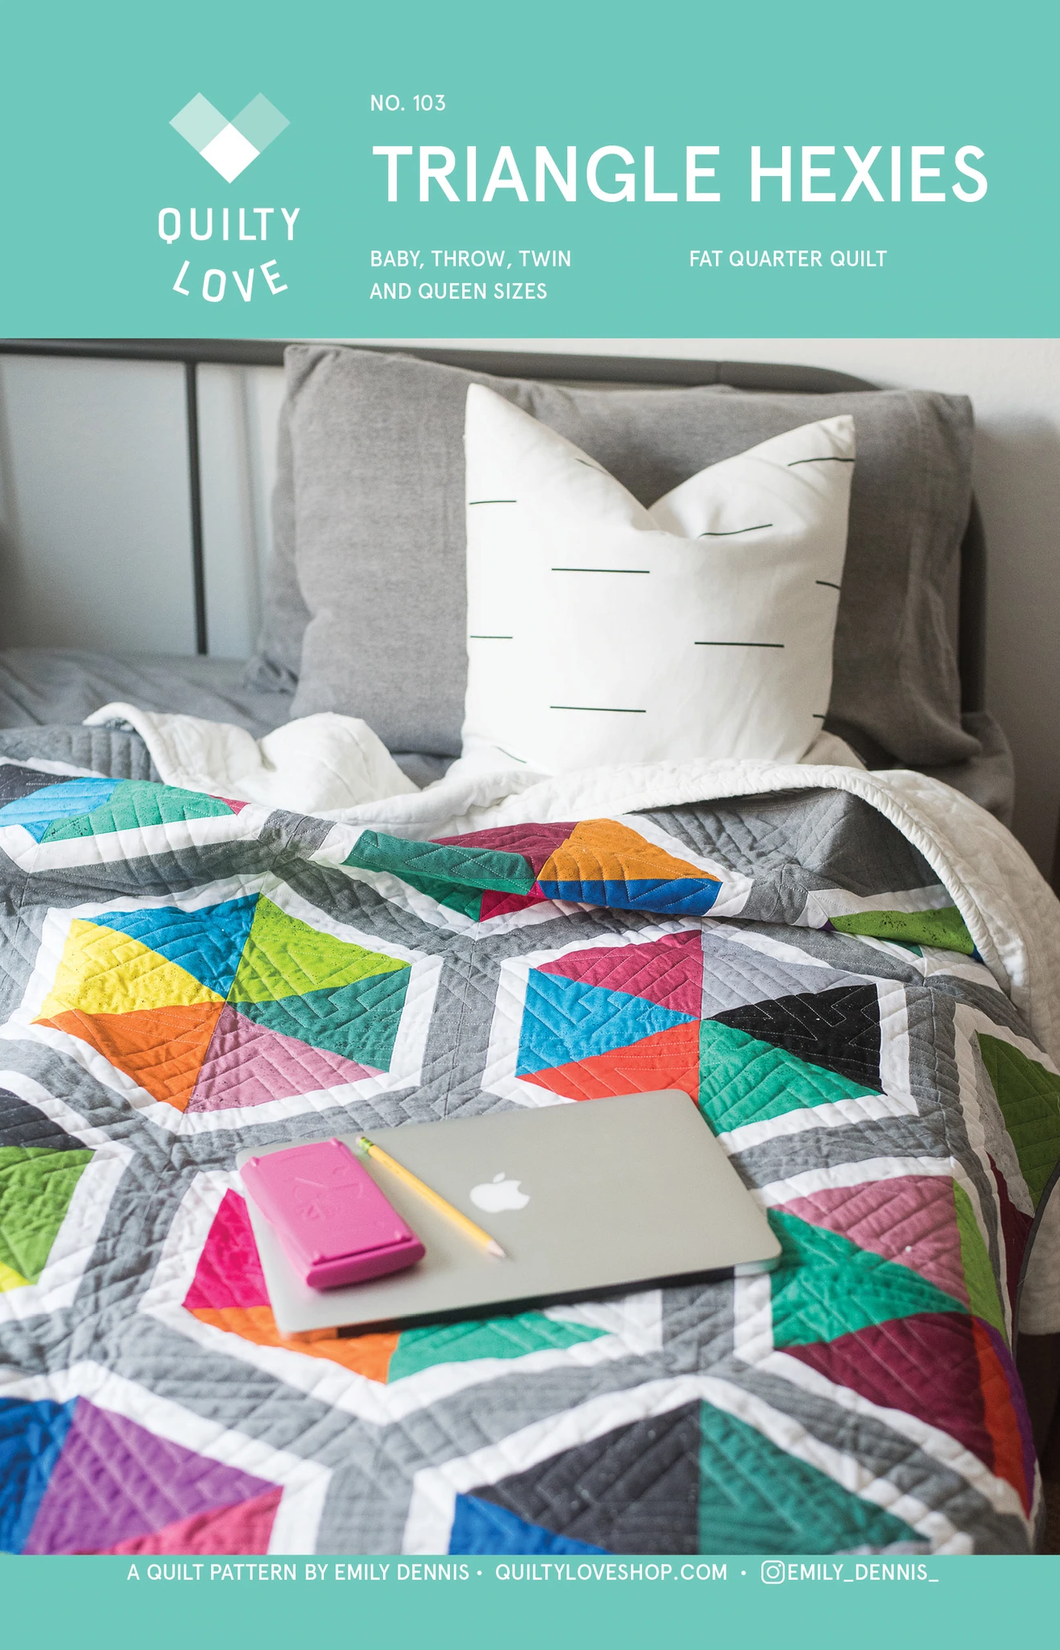 Triangle Hexies Quilt Pattern - Quilty Love